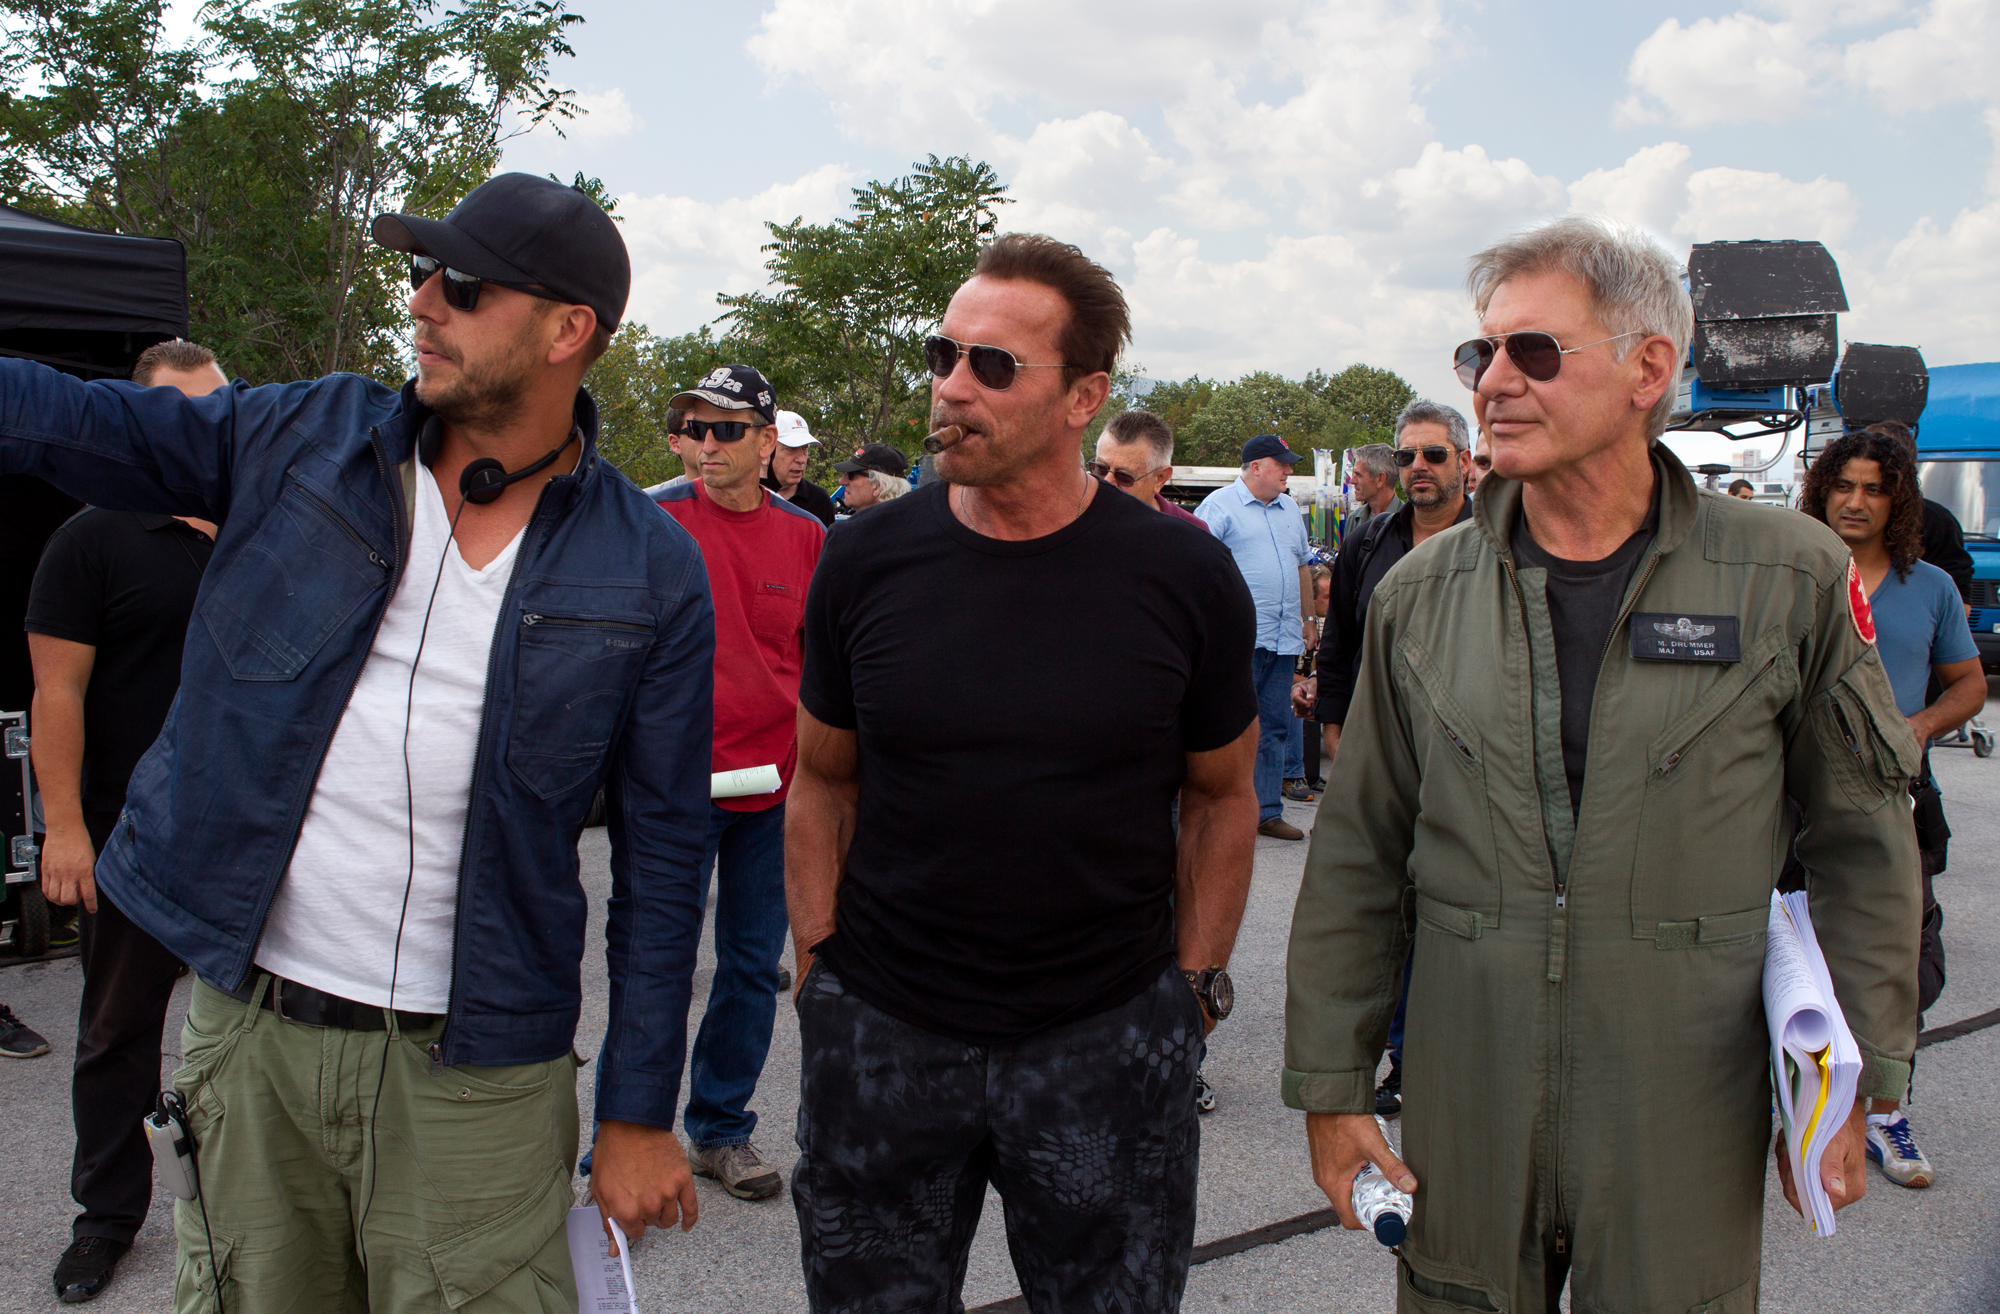 Patrick Hughes, Arnold Schwarzenegger and Harrison Ford on set of The Expendables 3.